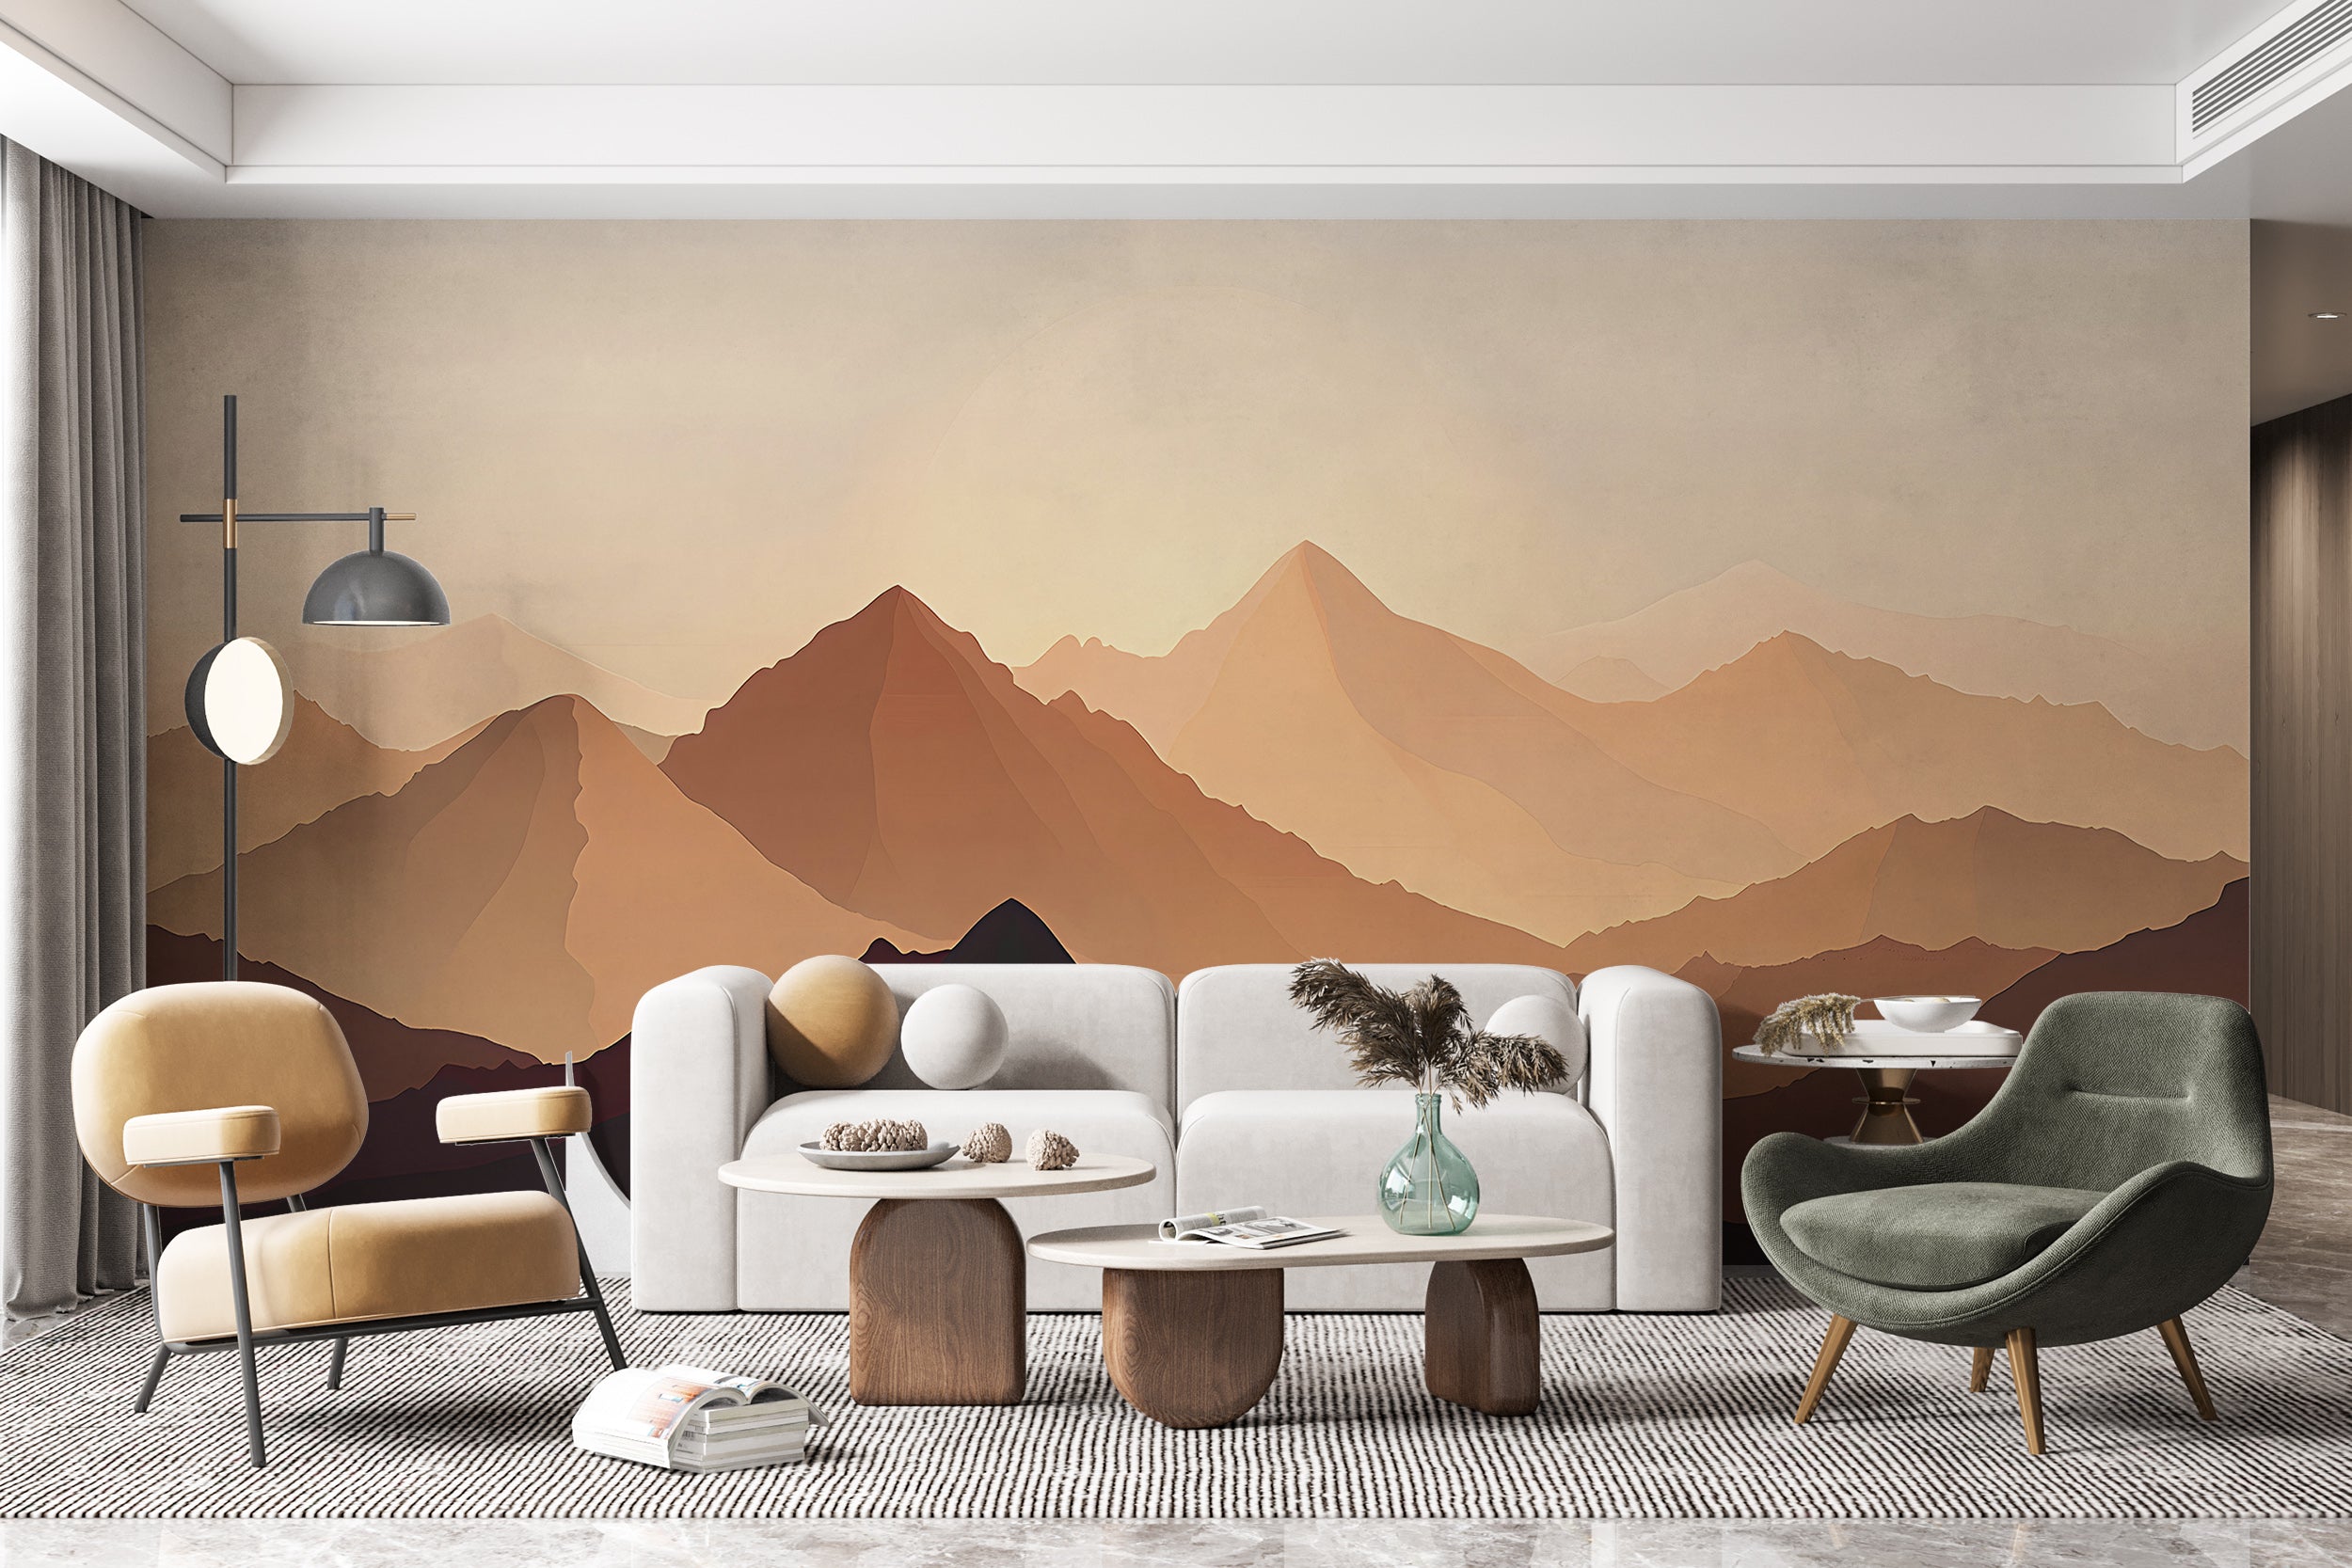 Sand Dunes Wallpaper, Peel and Stick Desert Wall Mural, Removable Beige and Brown Mountains Landscape Art, Custom Size Wall Decor